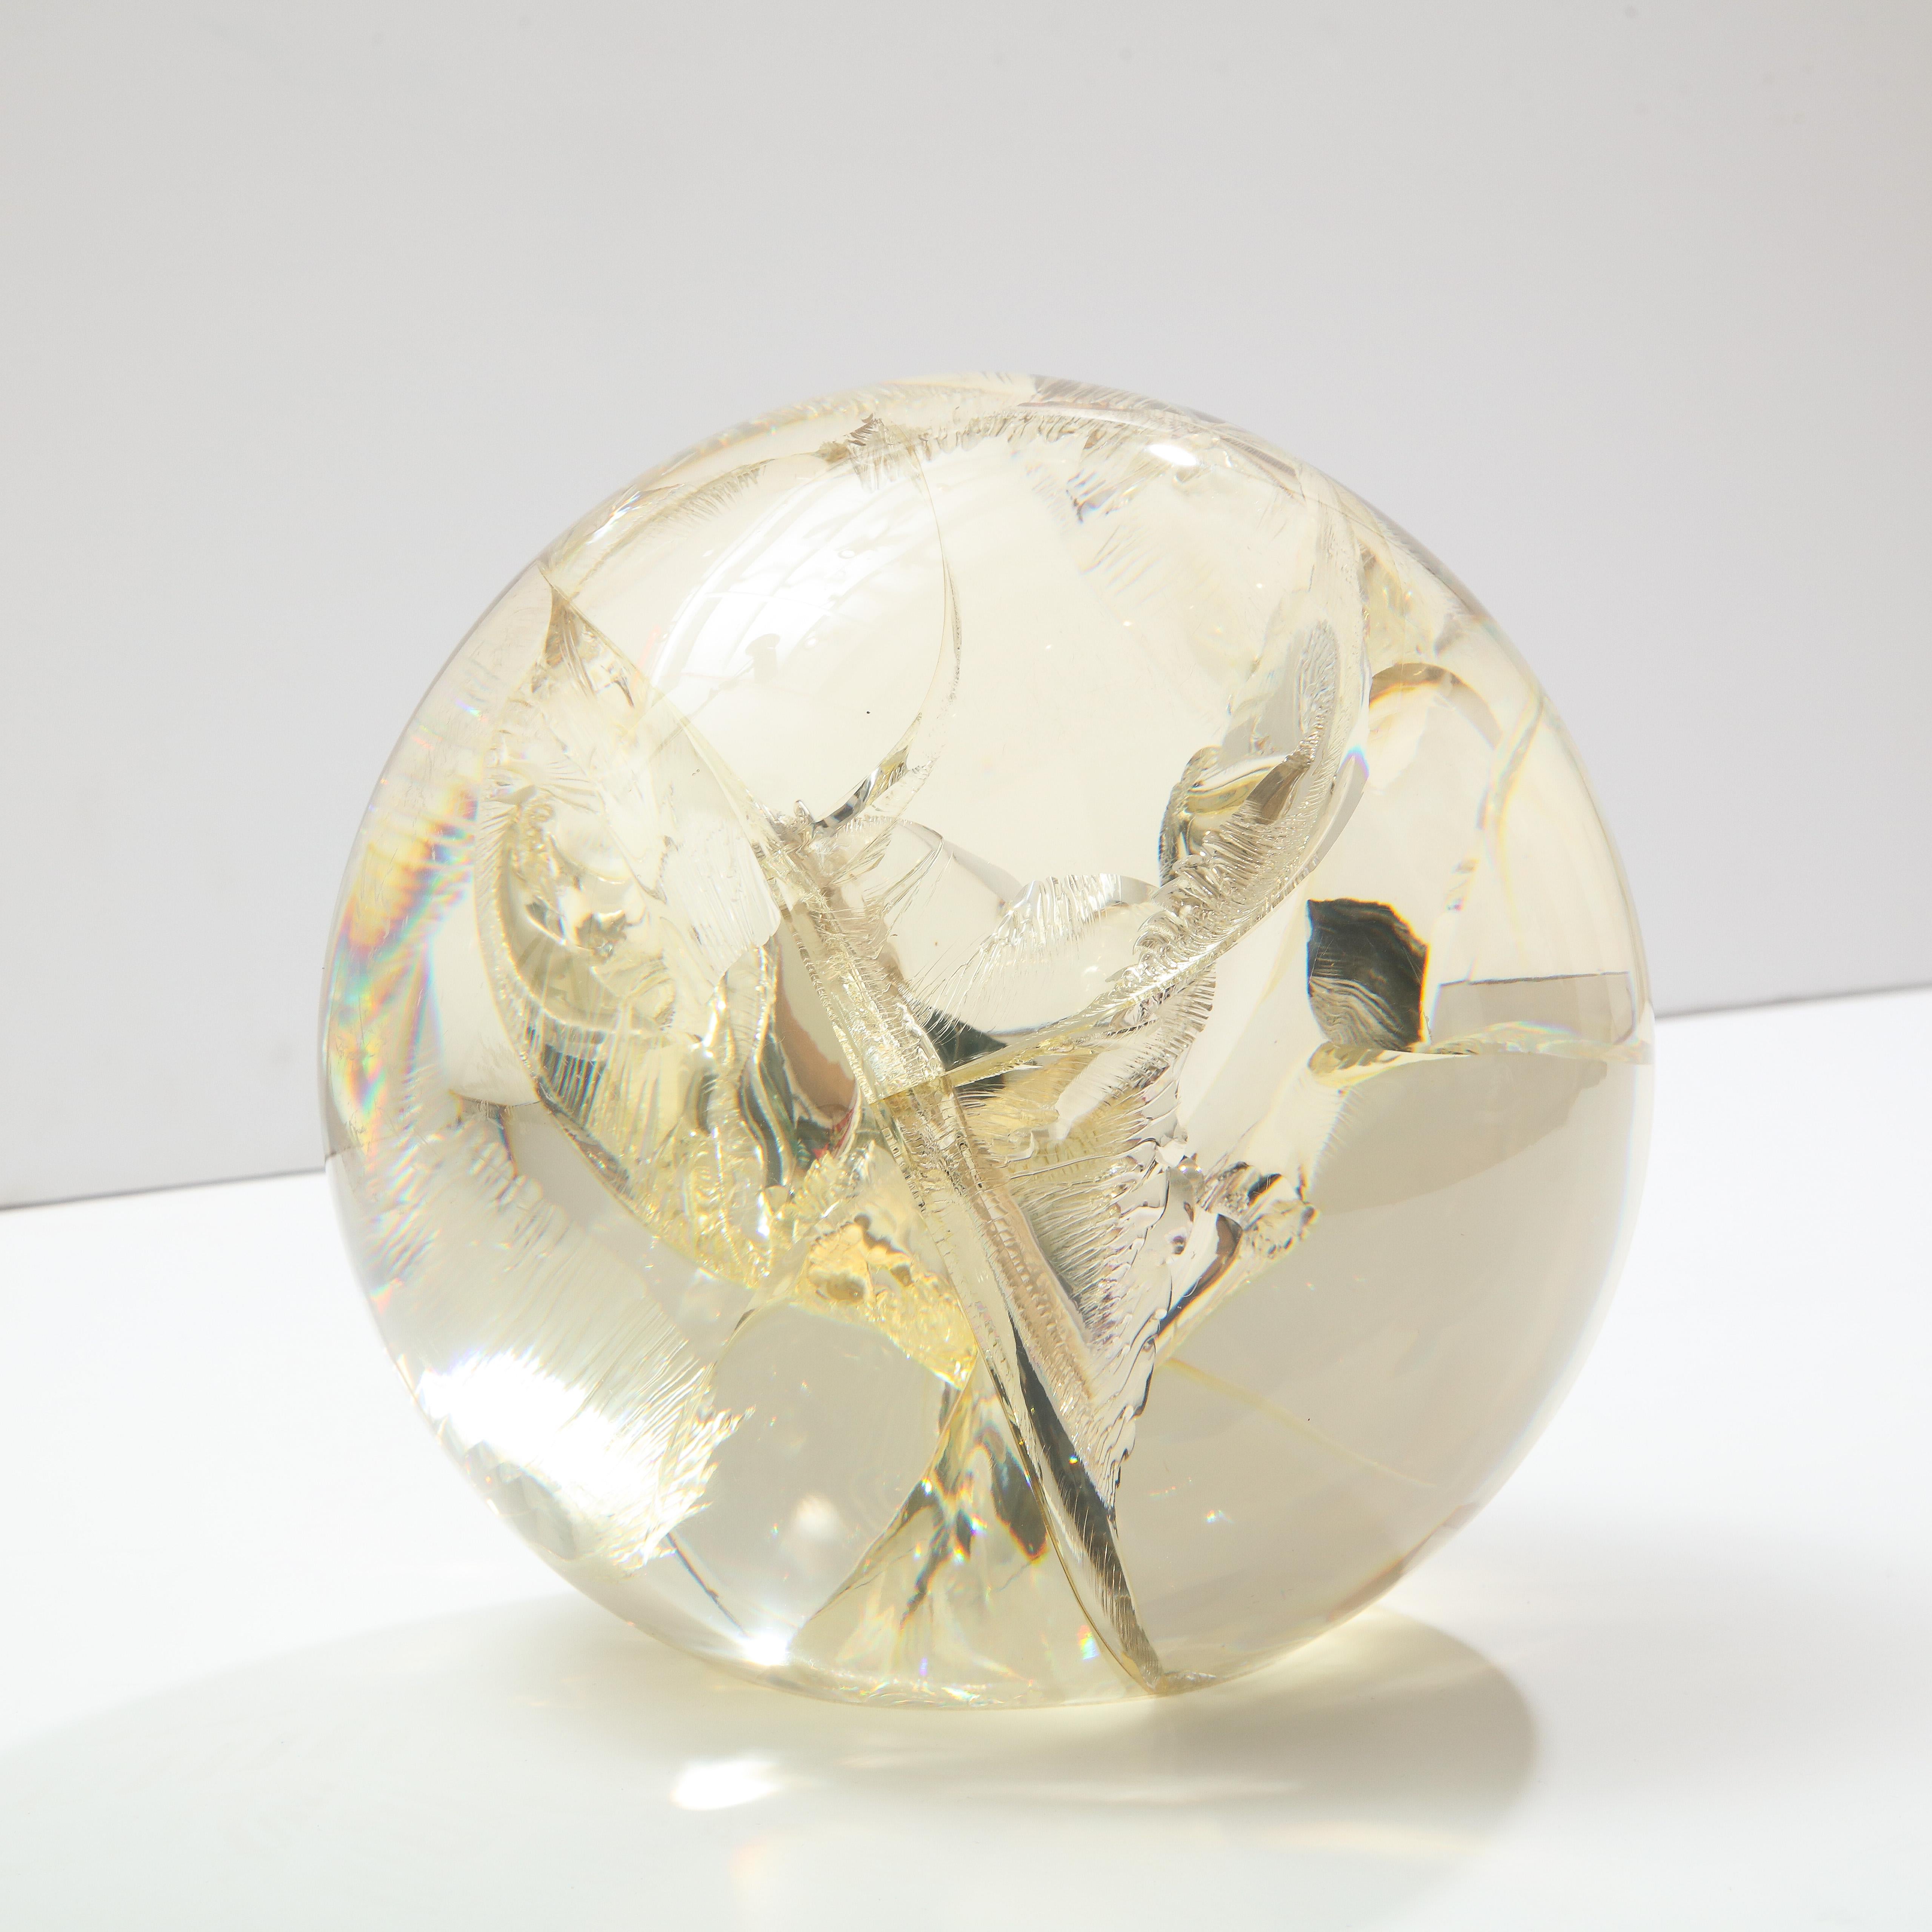 Pierre Giraudon fractured resin sphere, sculpture, clear and yellow gold. Medium scale tabletop acrylic sculpture with internal fractured inclusions and colored with a yellow gold tint. The base of the sphere is flat for stable display (see photo